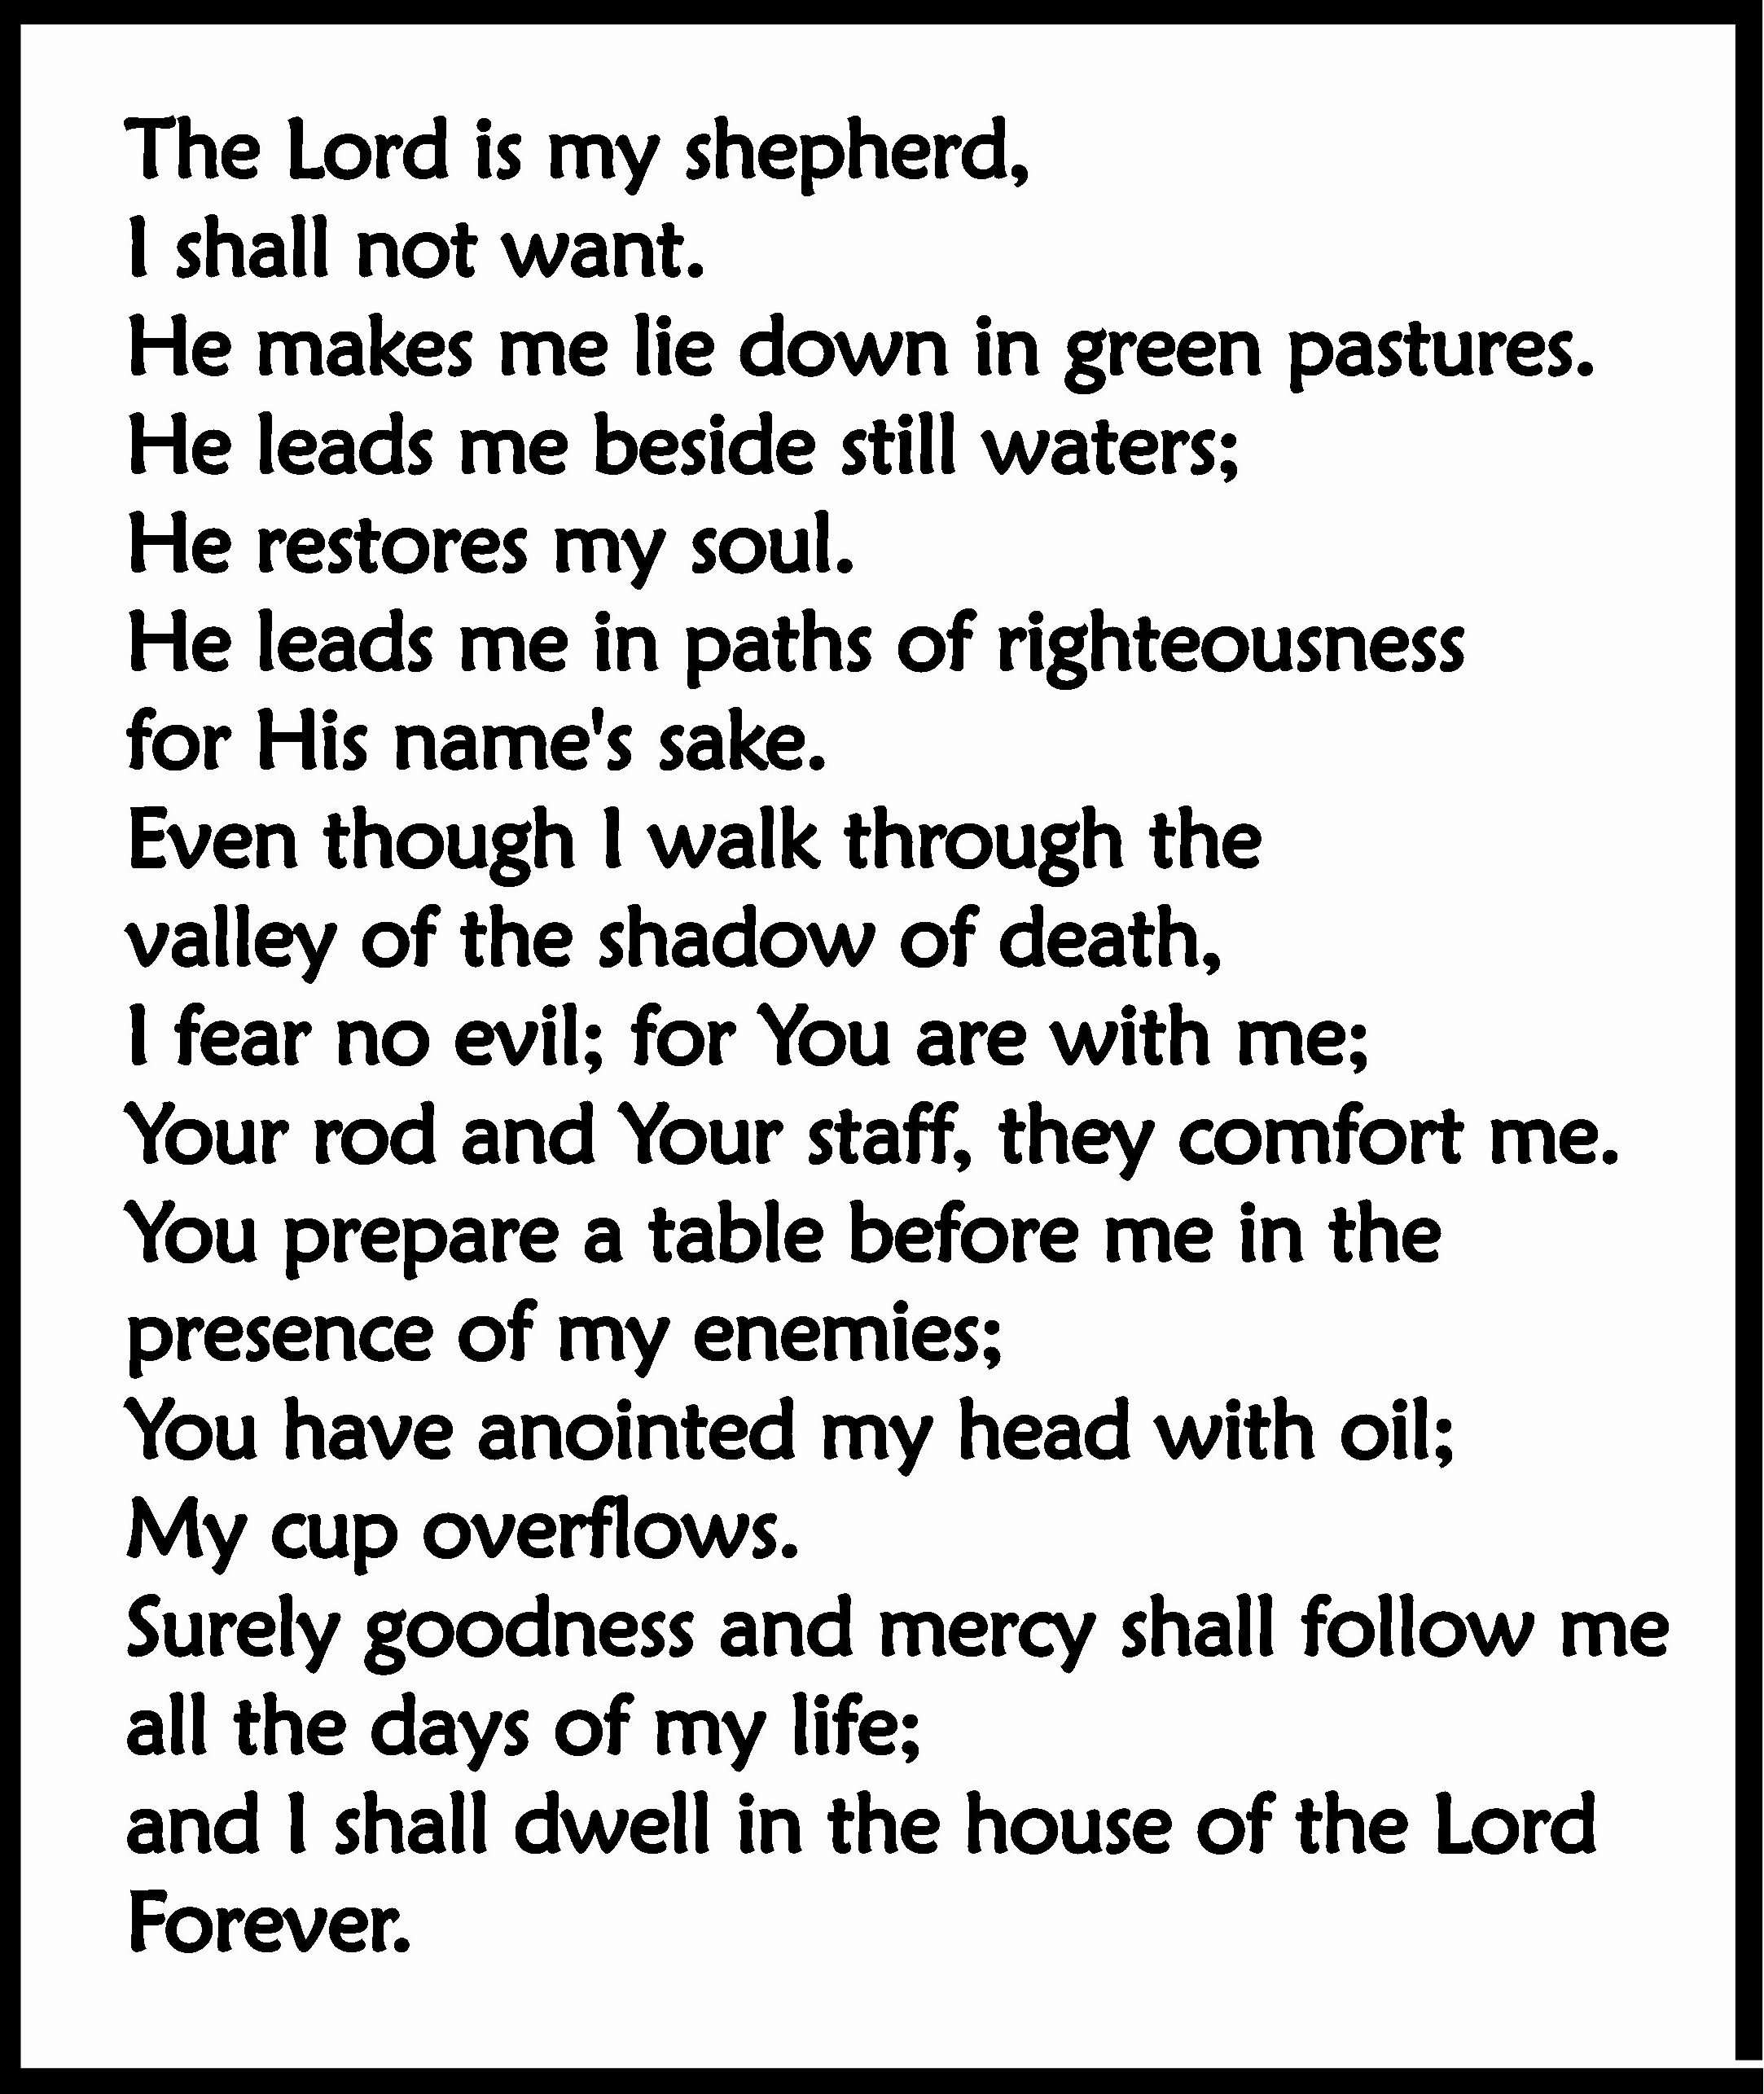 the lord is my shepherd clipart - photo #21